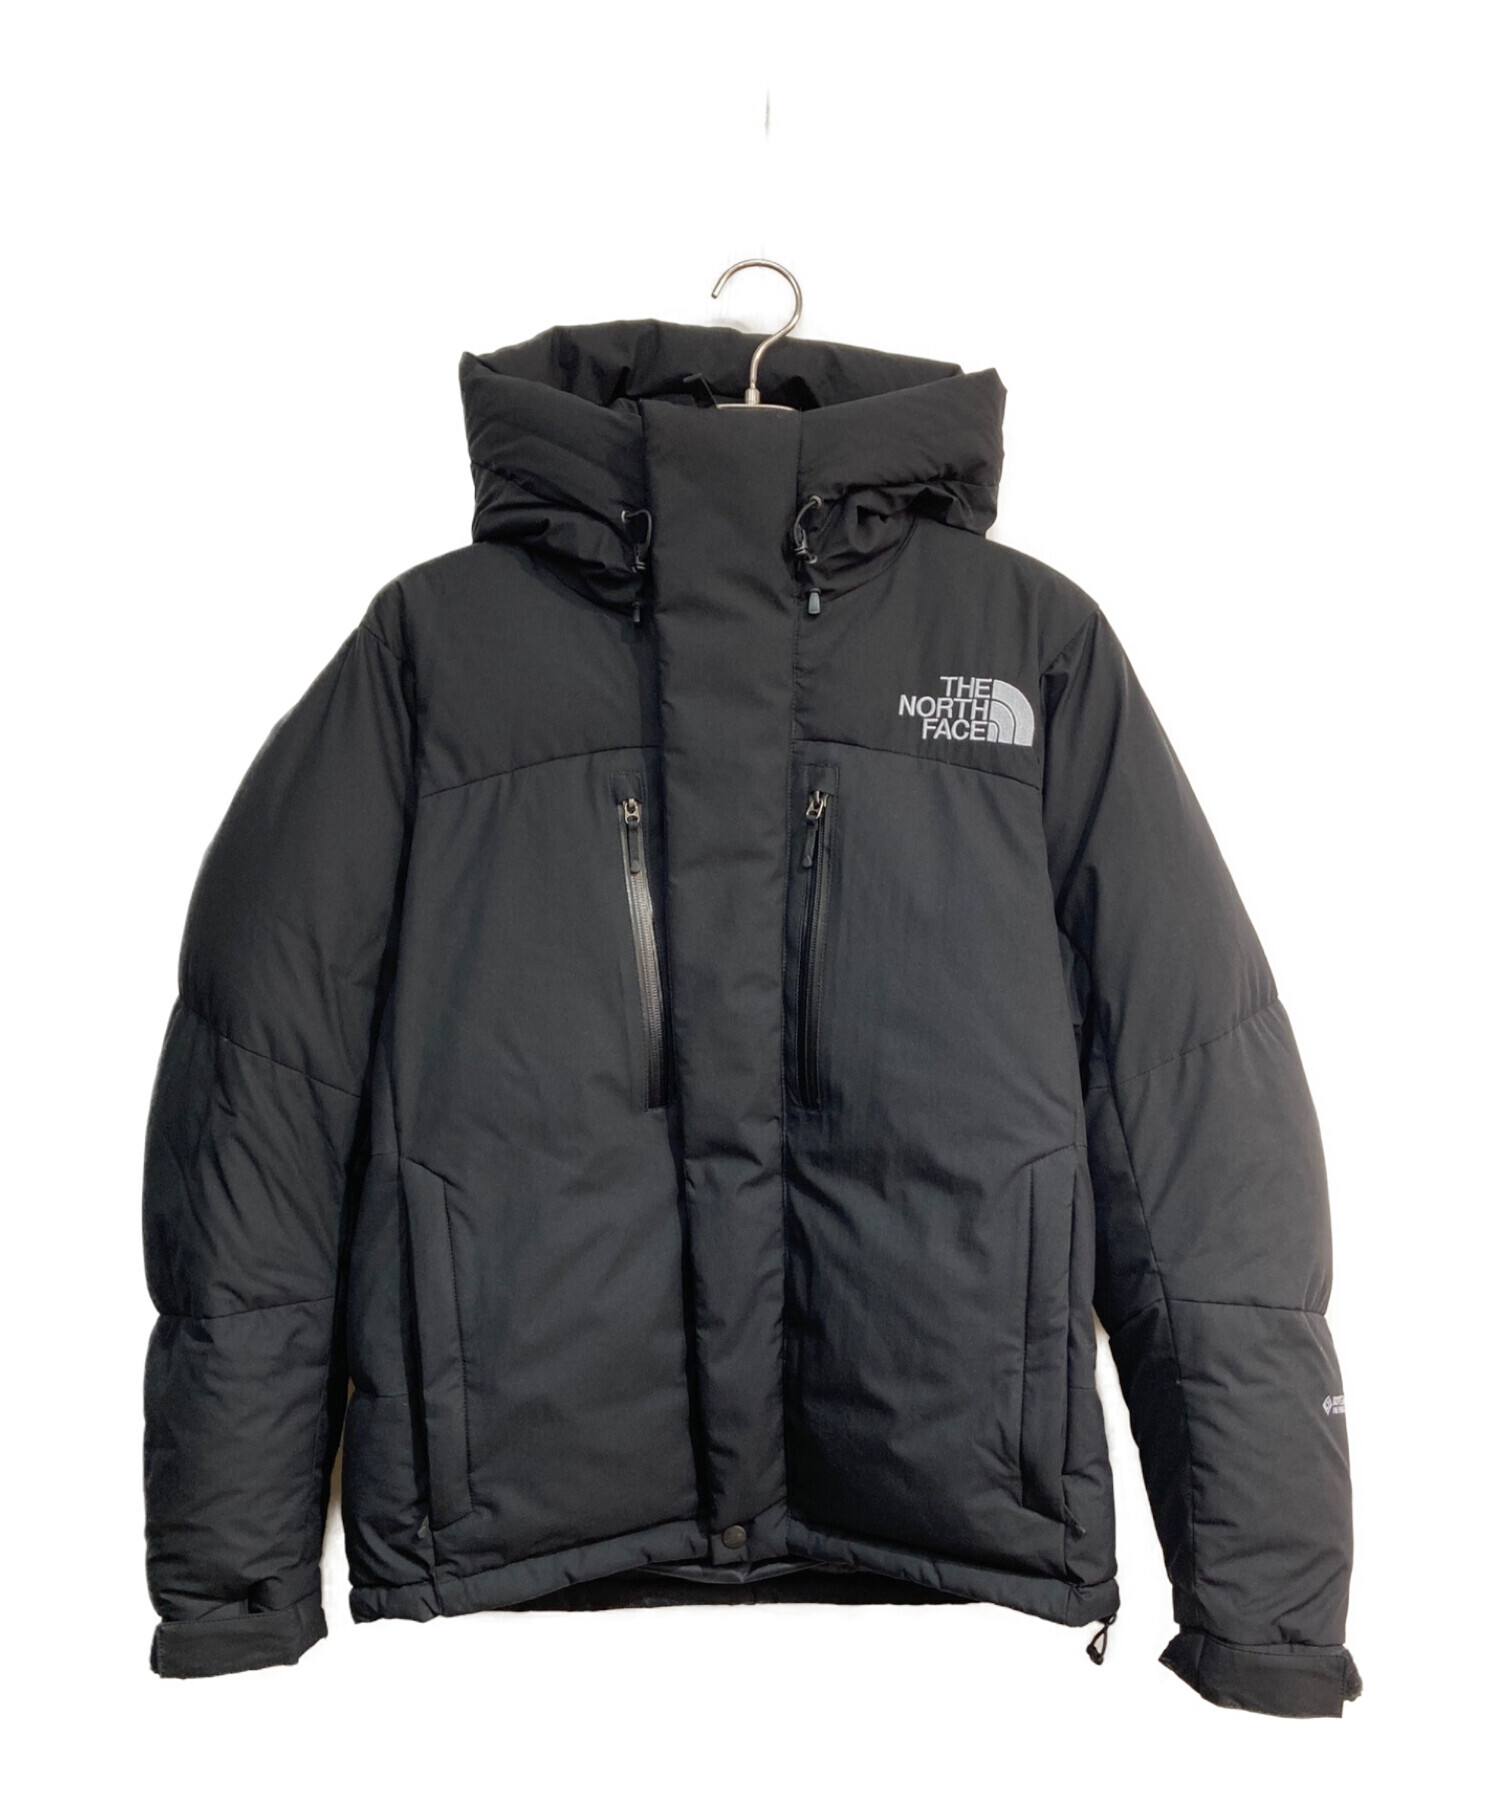 THE NORTH FACE バルトロライトジャケット ND91950 M